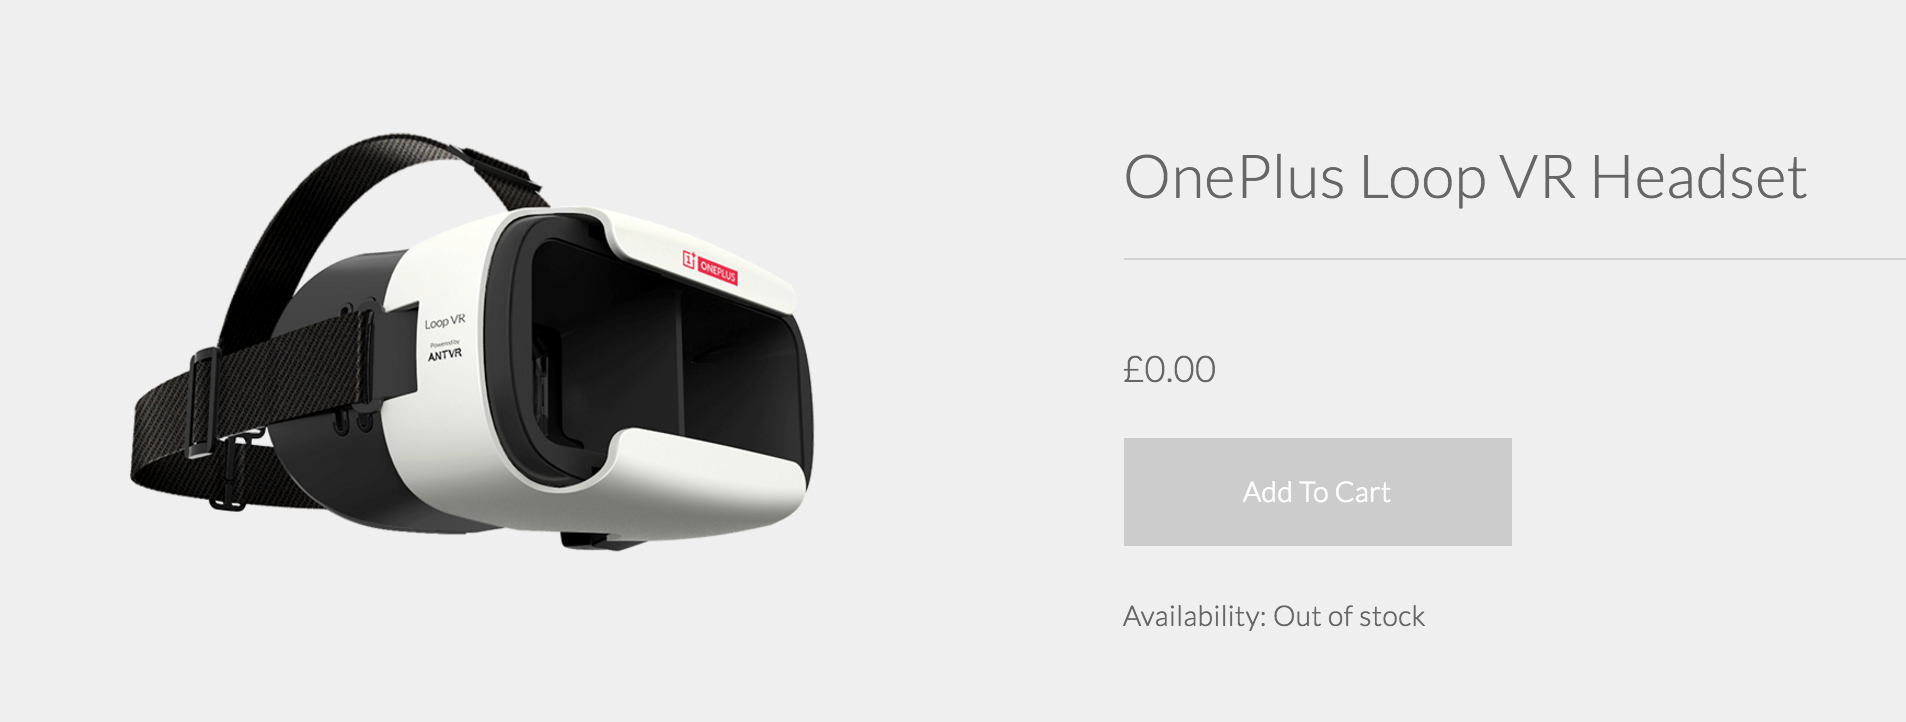 Screen Shot 2016 05 23 at 8.35.02 PM - OnePlus giving away Free VR Headsets; OnePlus Three Launch will be available in VR!